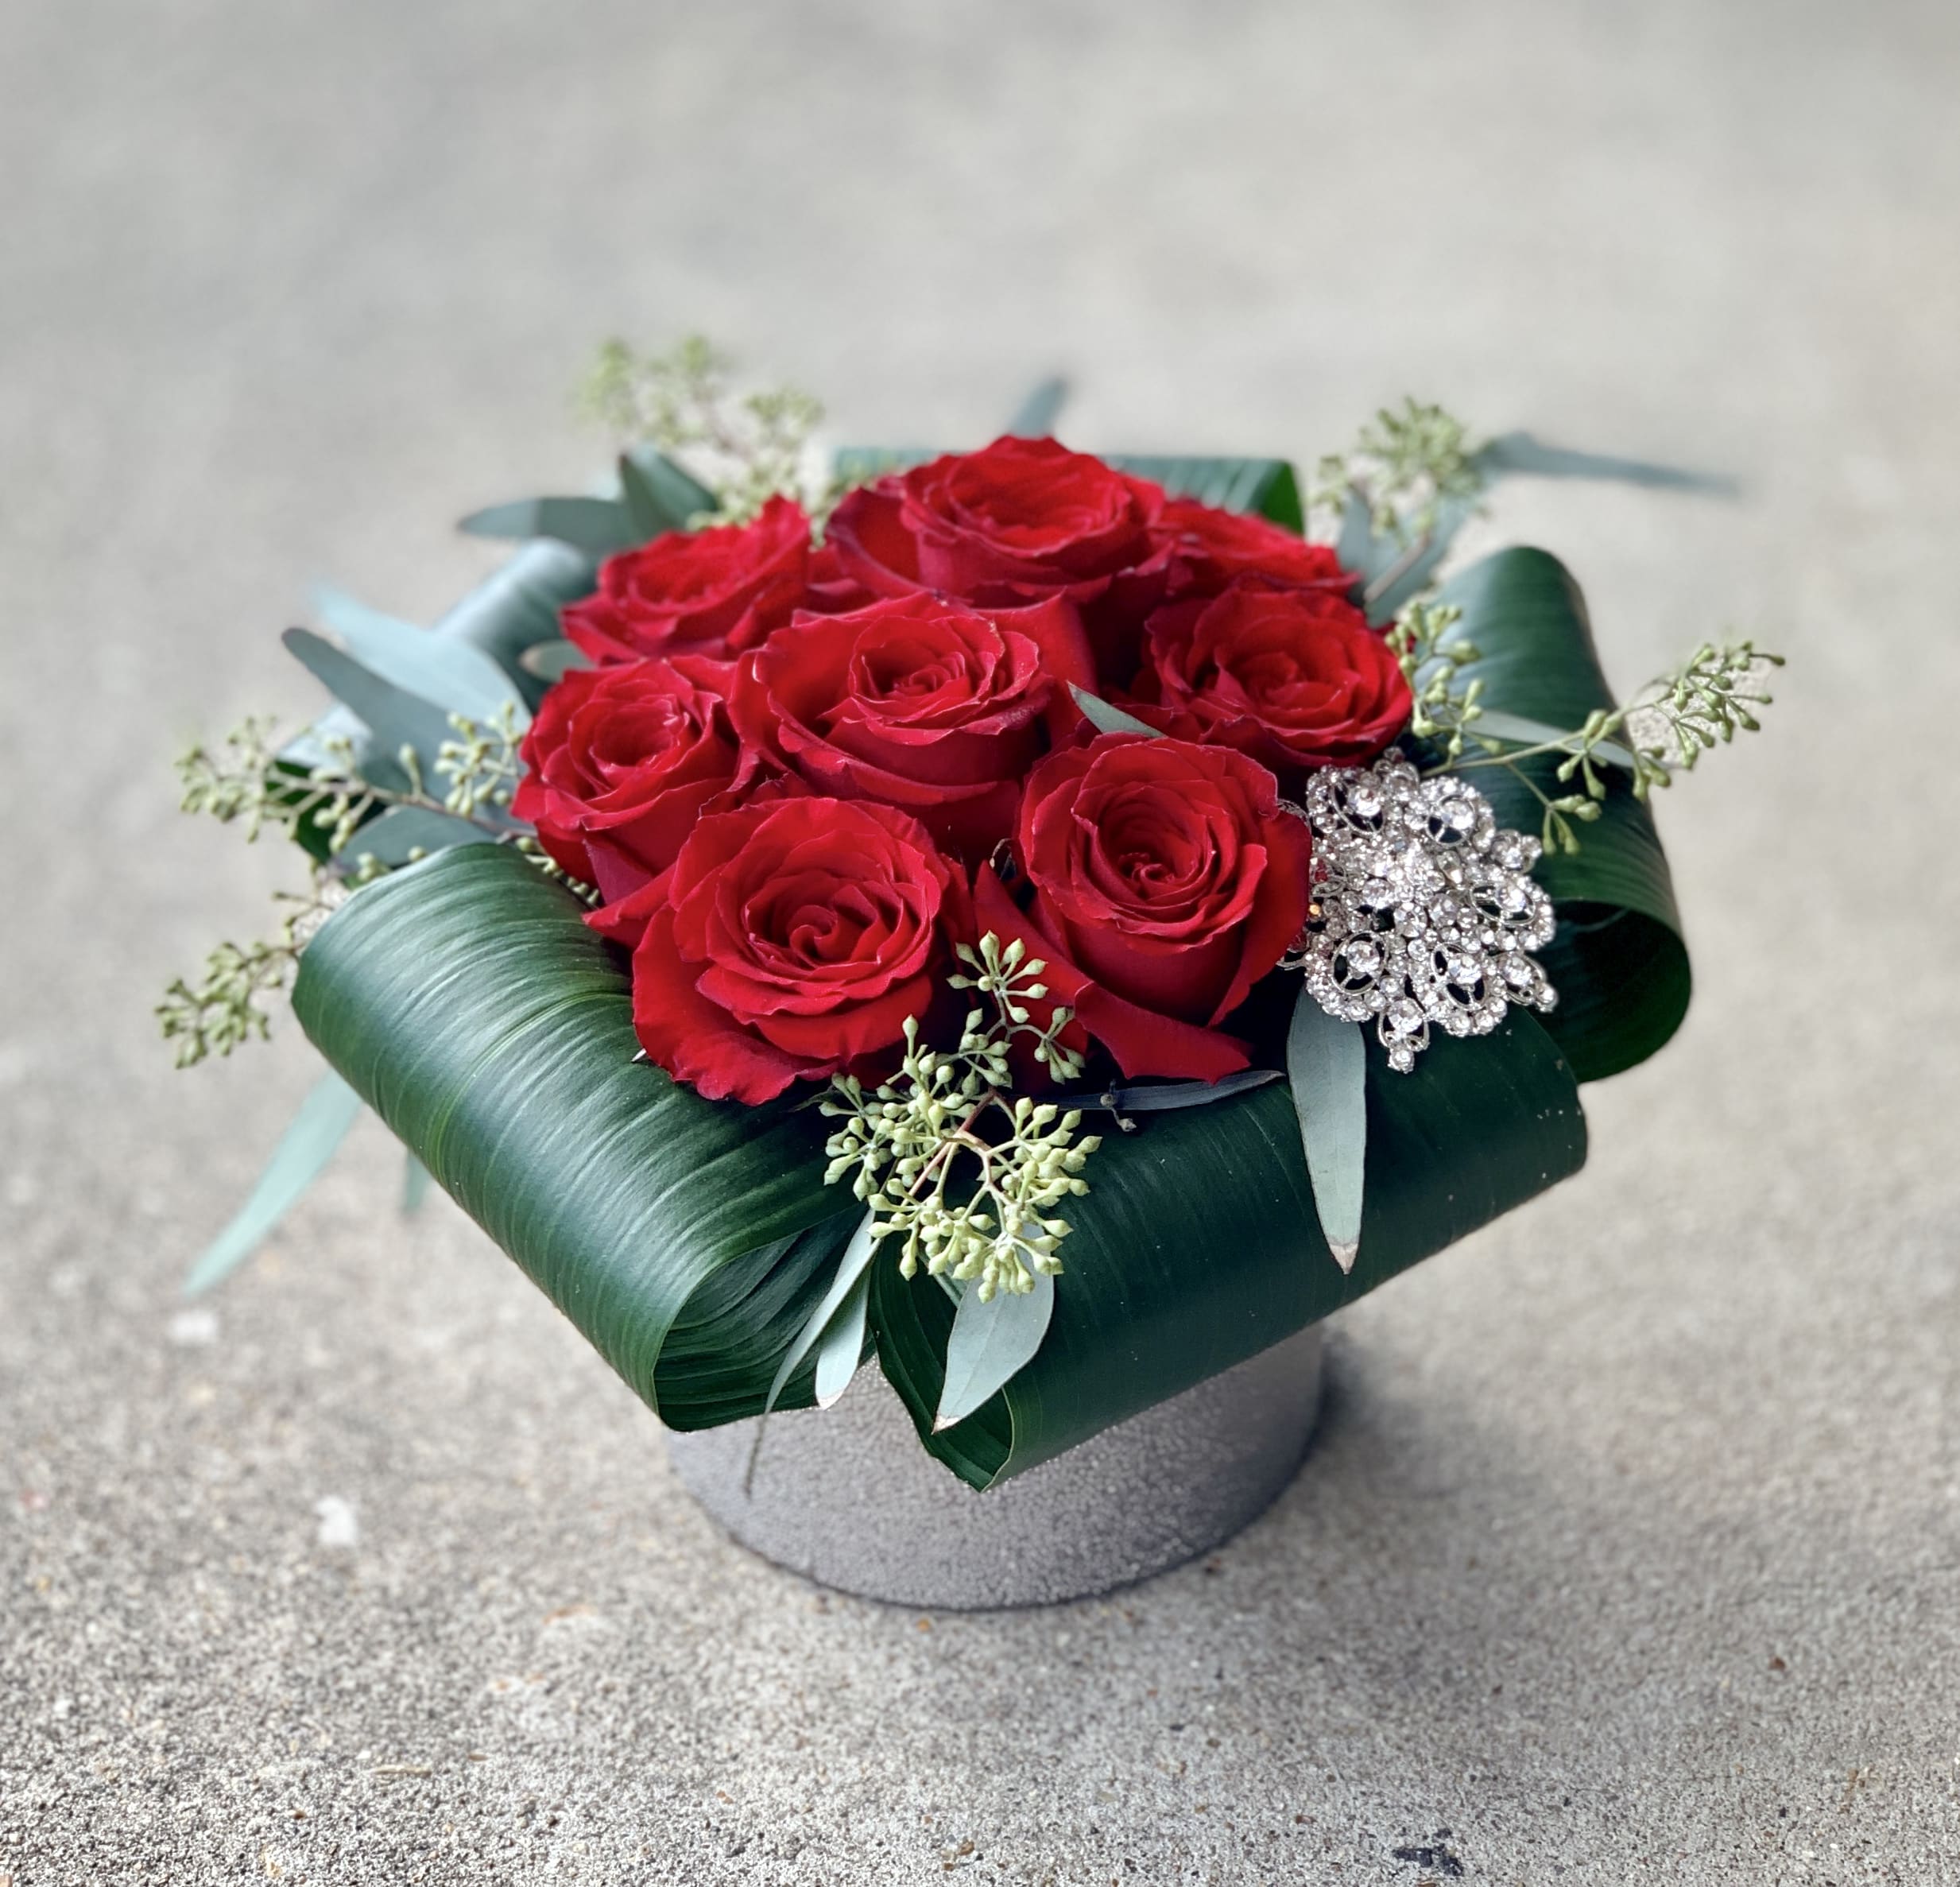 Mandy A'Moore - This lovely arrangement features 9 ravishing red rose nestled together in a keepsake silver vessel surrounded by rolled aspidistra leaves and a wearable vintage inspired rhinestone brooch!